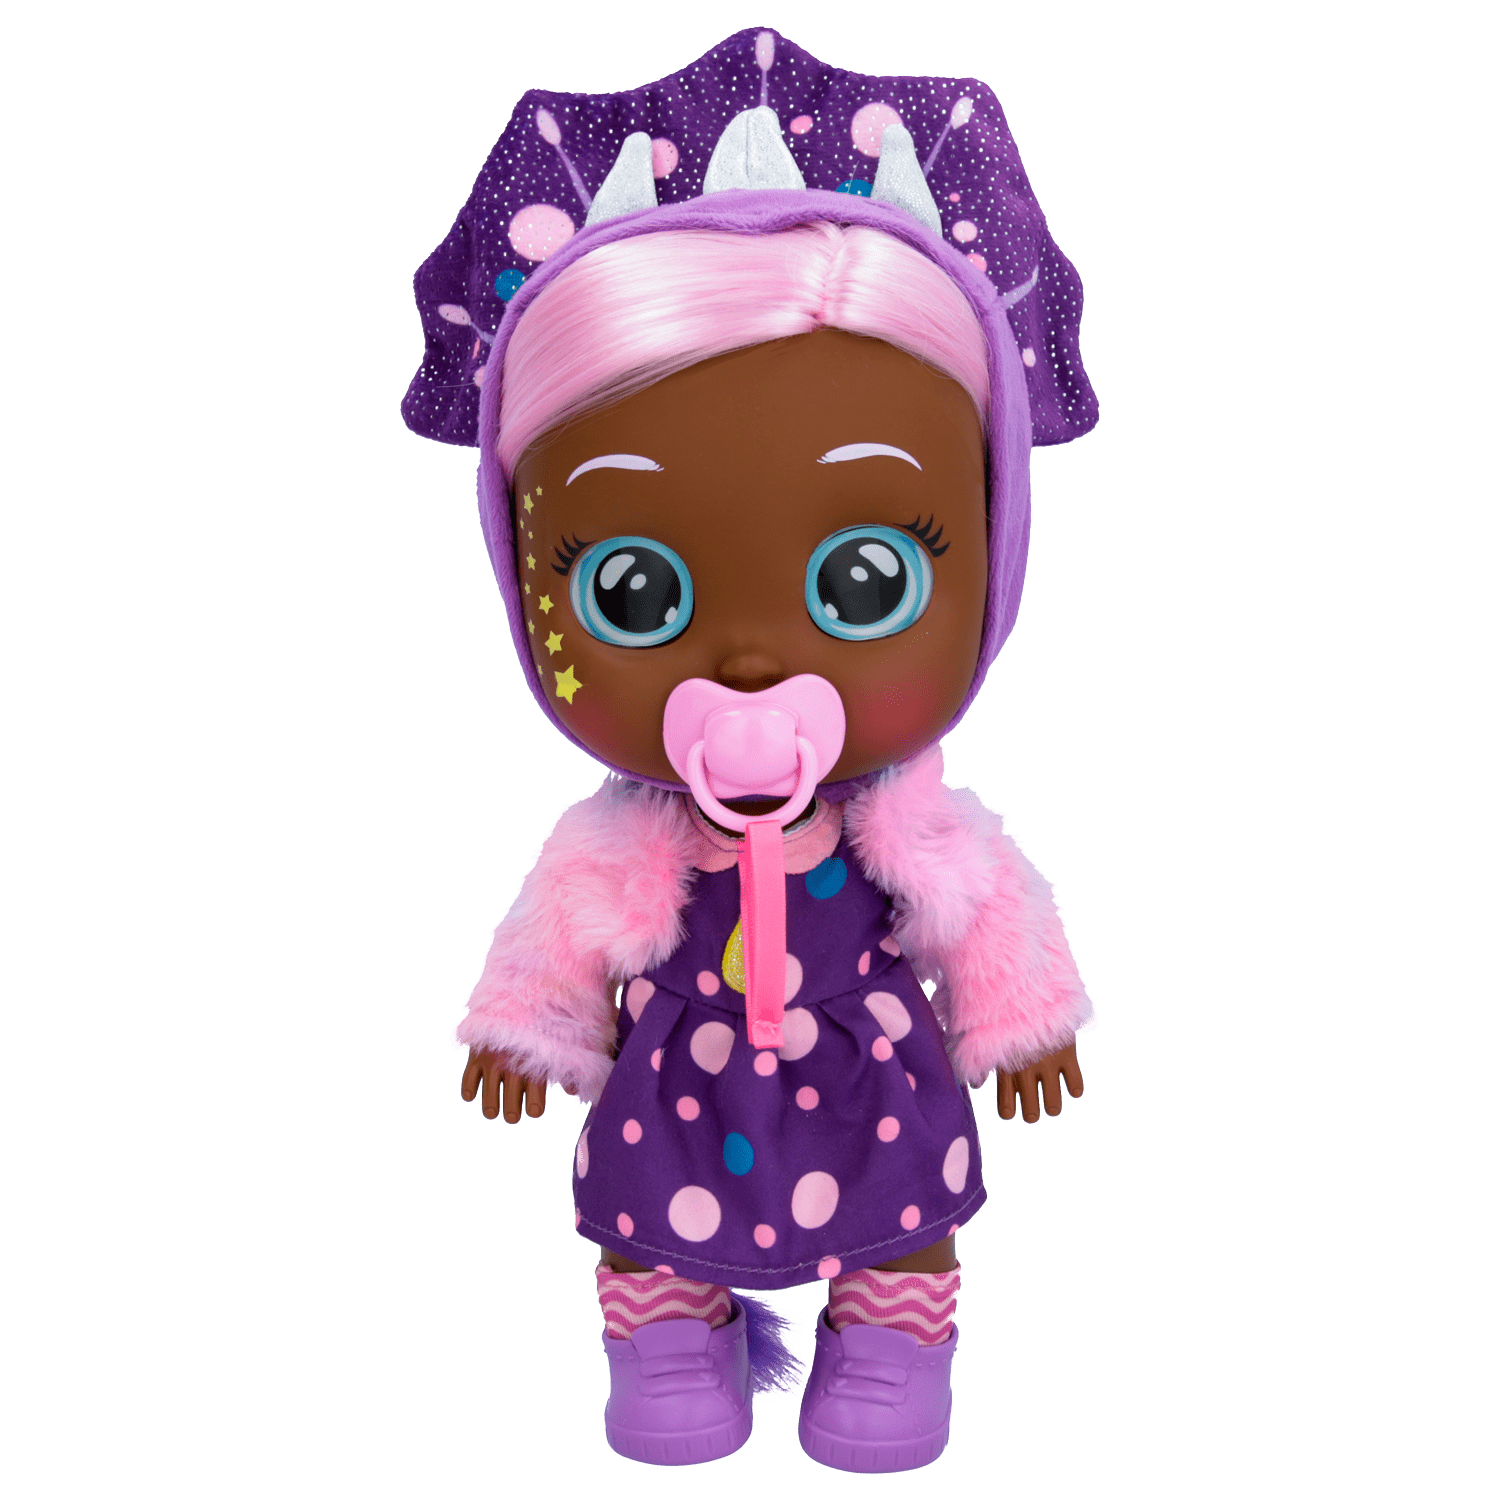 Cry Babies Dressy Fantasy Phoebe 12 inch Baby Doll for Girls Ages 1.5 - 3 Years